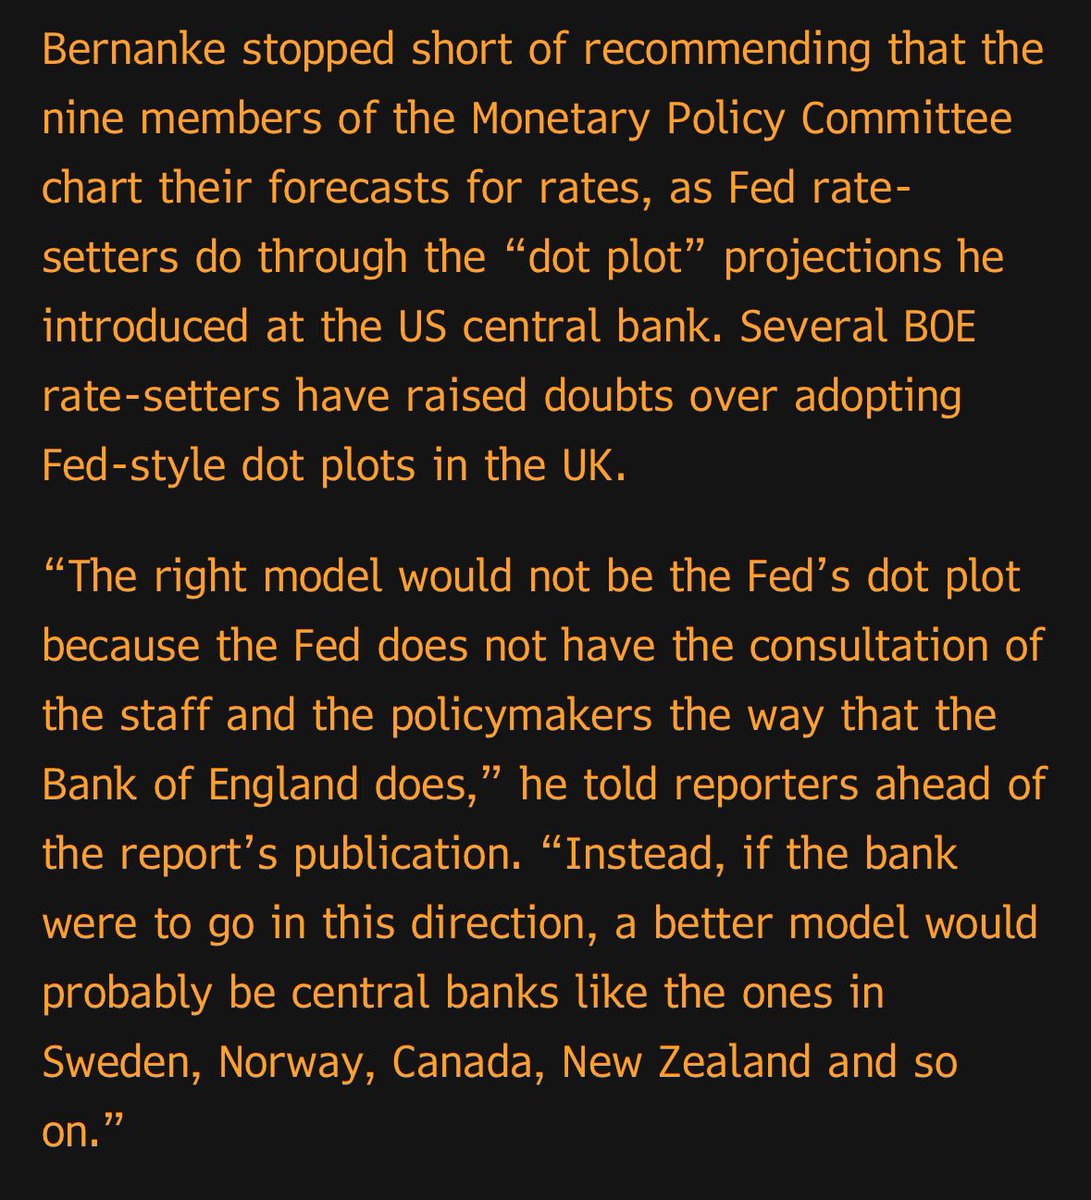 Bloomberg on the key aspects of the Bernanke report to the Bank of England regarding the central bank’s approach to forecasting key policy tools and outcomes. #economy #markets #centralbanks @bankofengland #EconTwitter